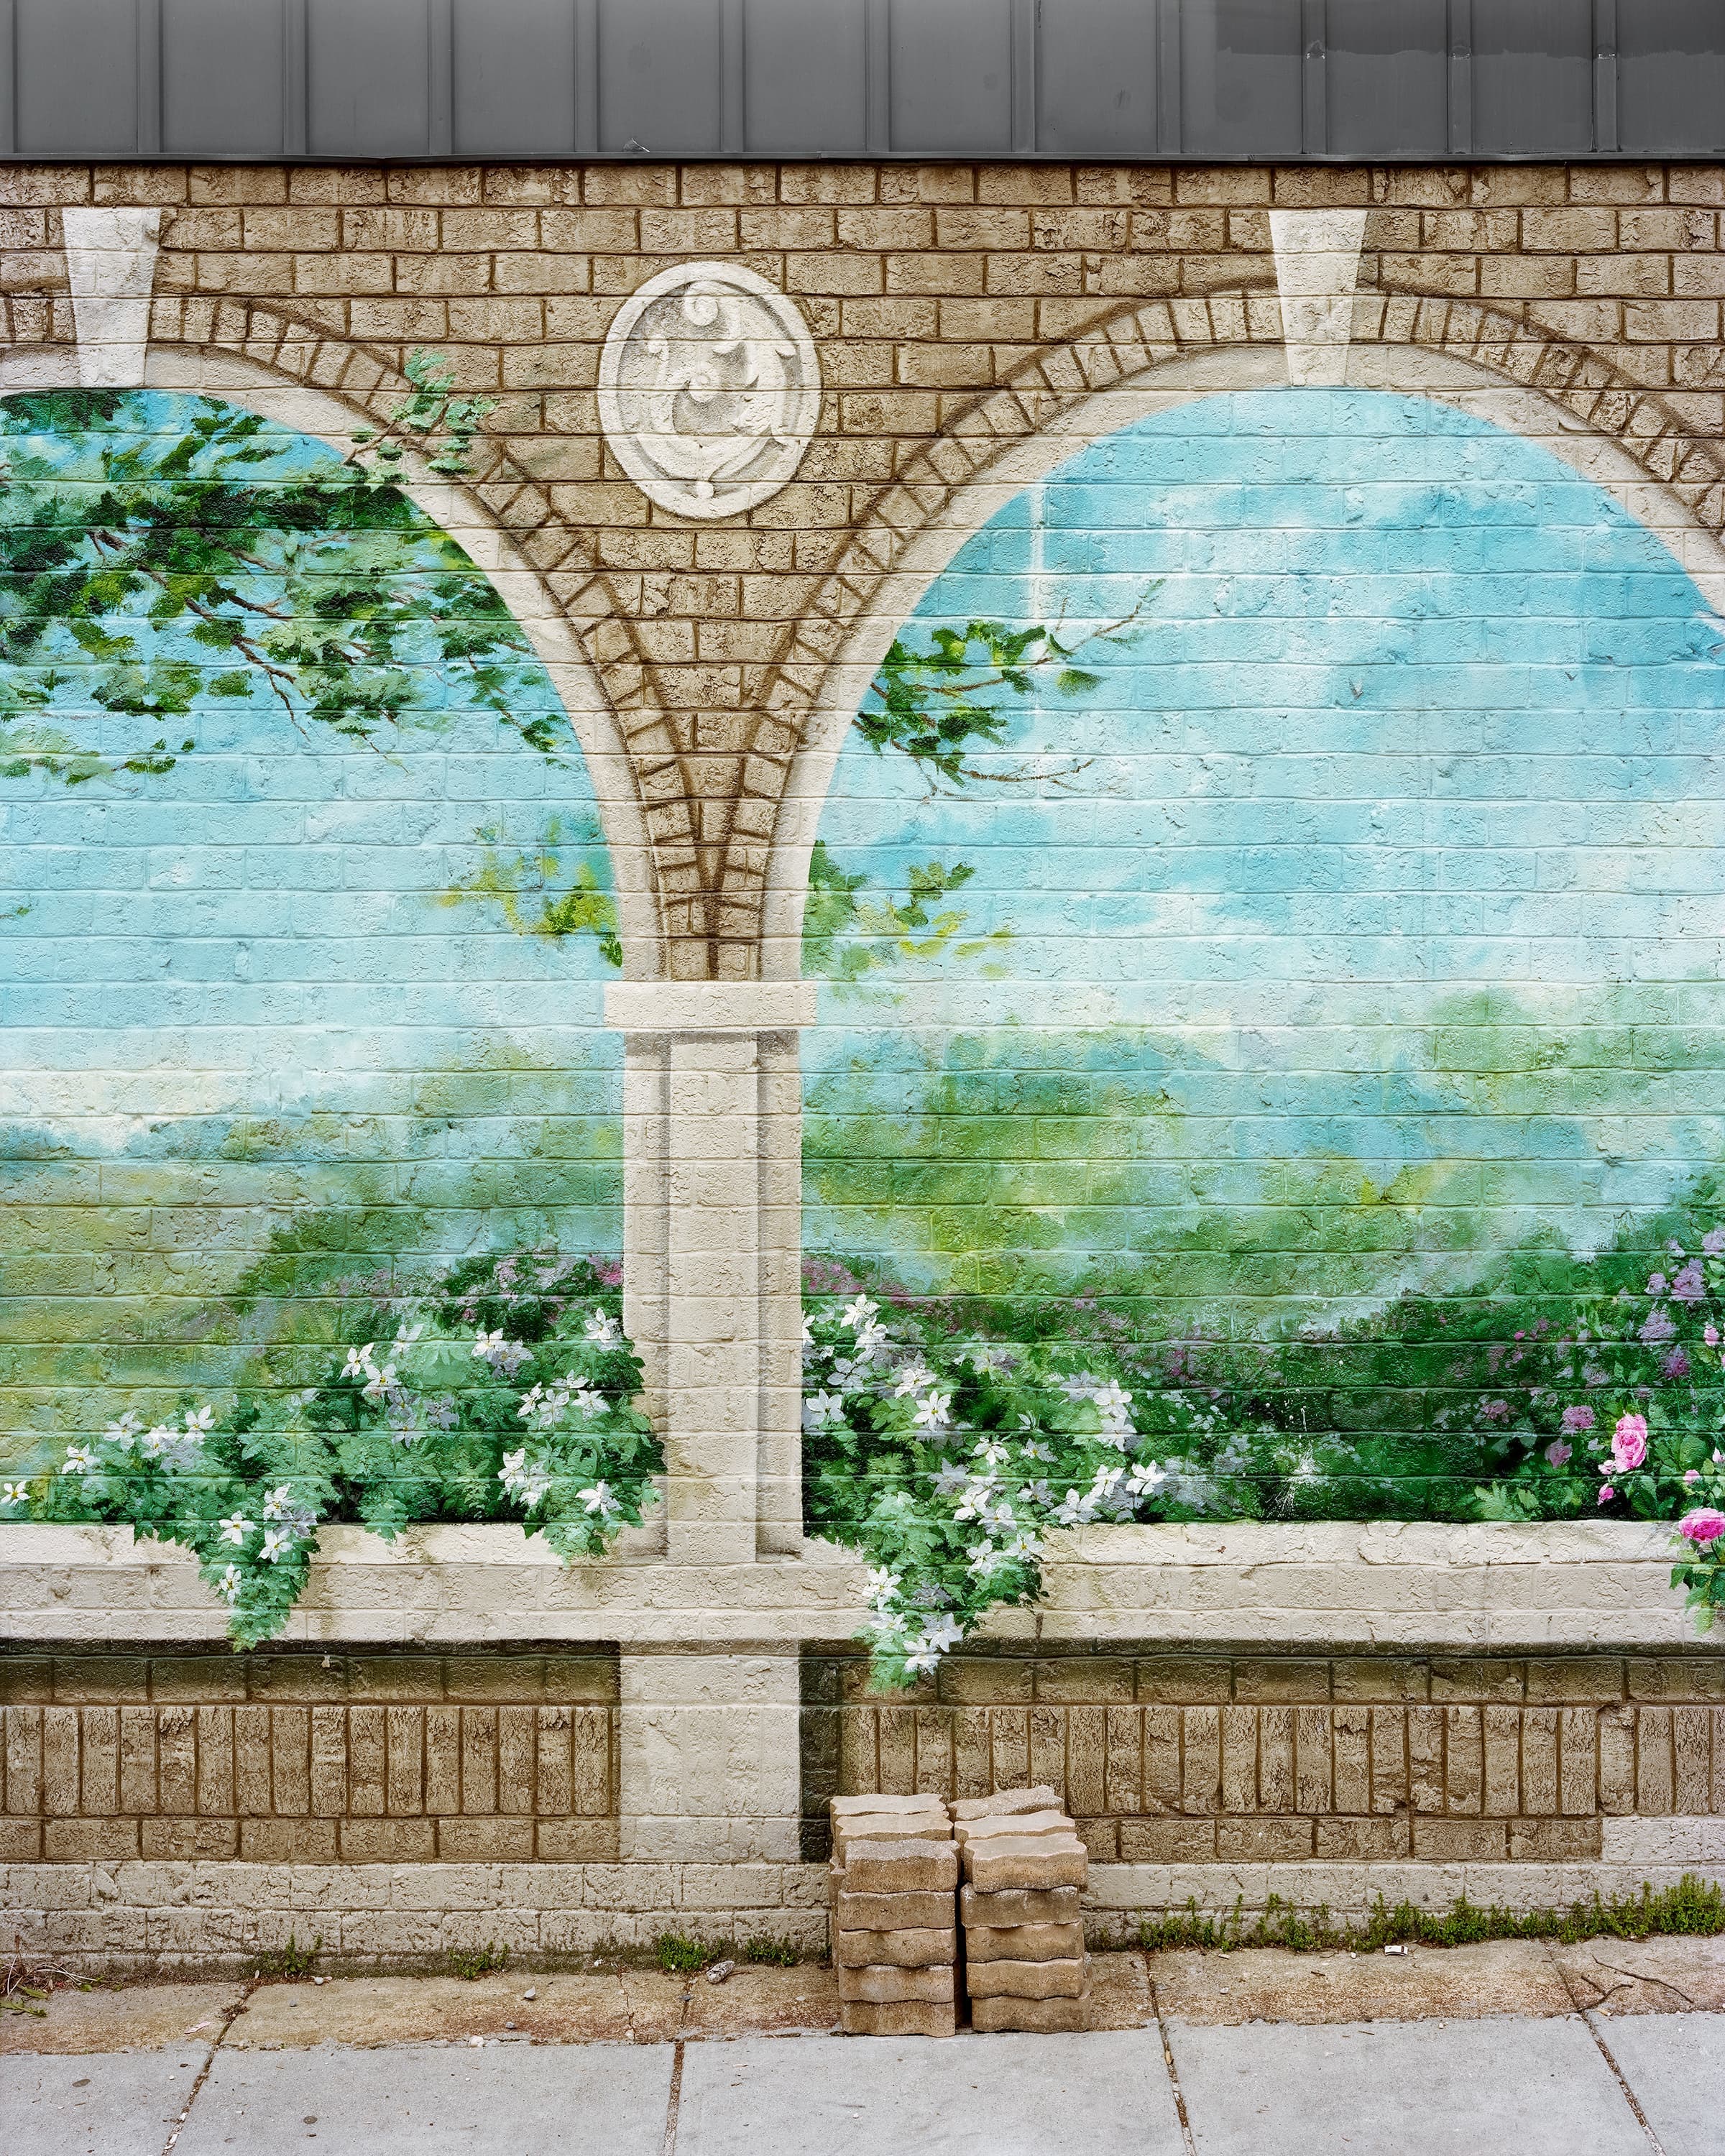 Painted mural of a series of arches overlooking flowers and landscape on an abandoned brick wall.